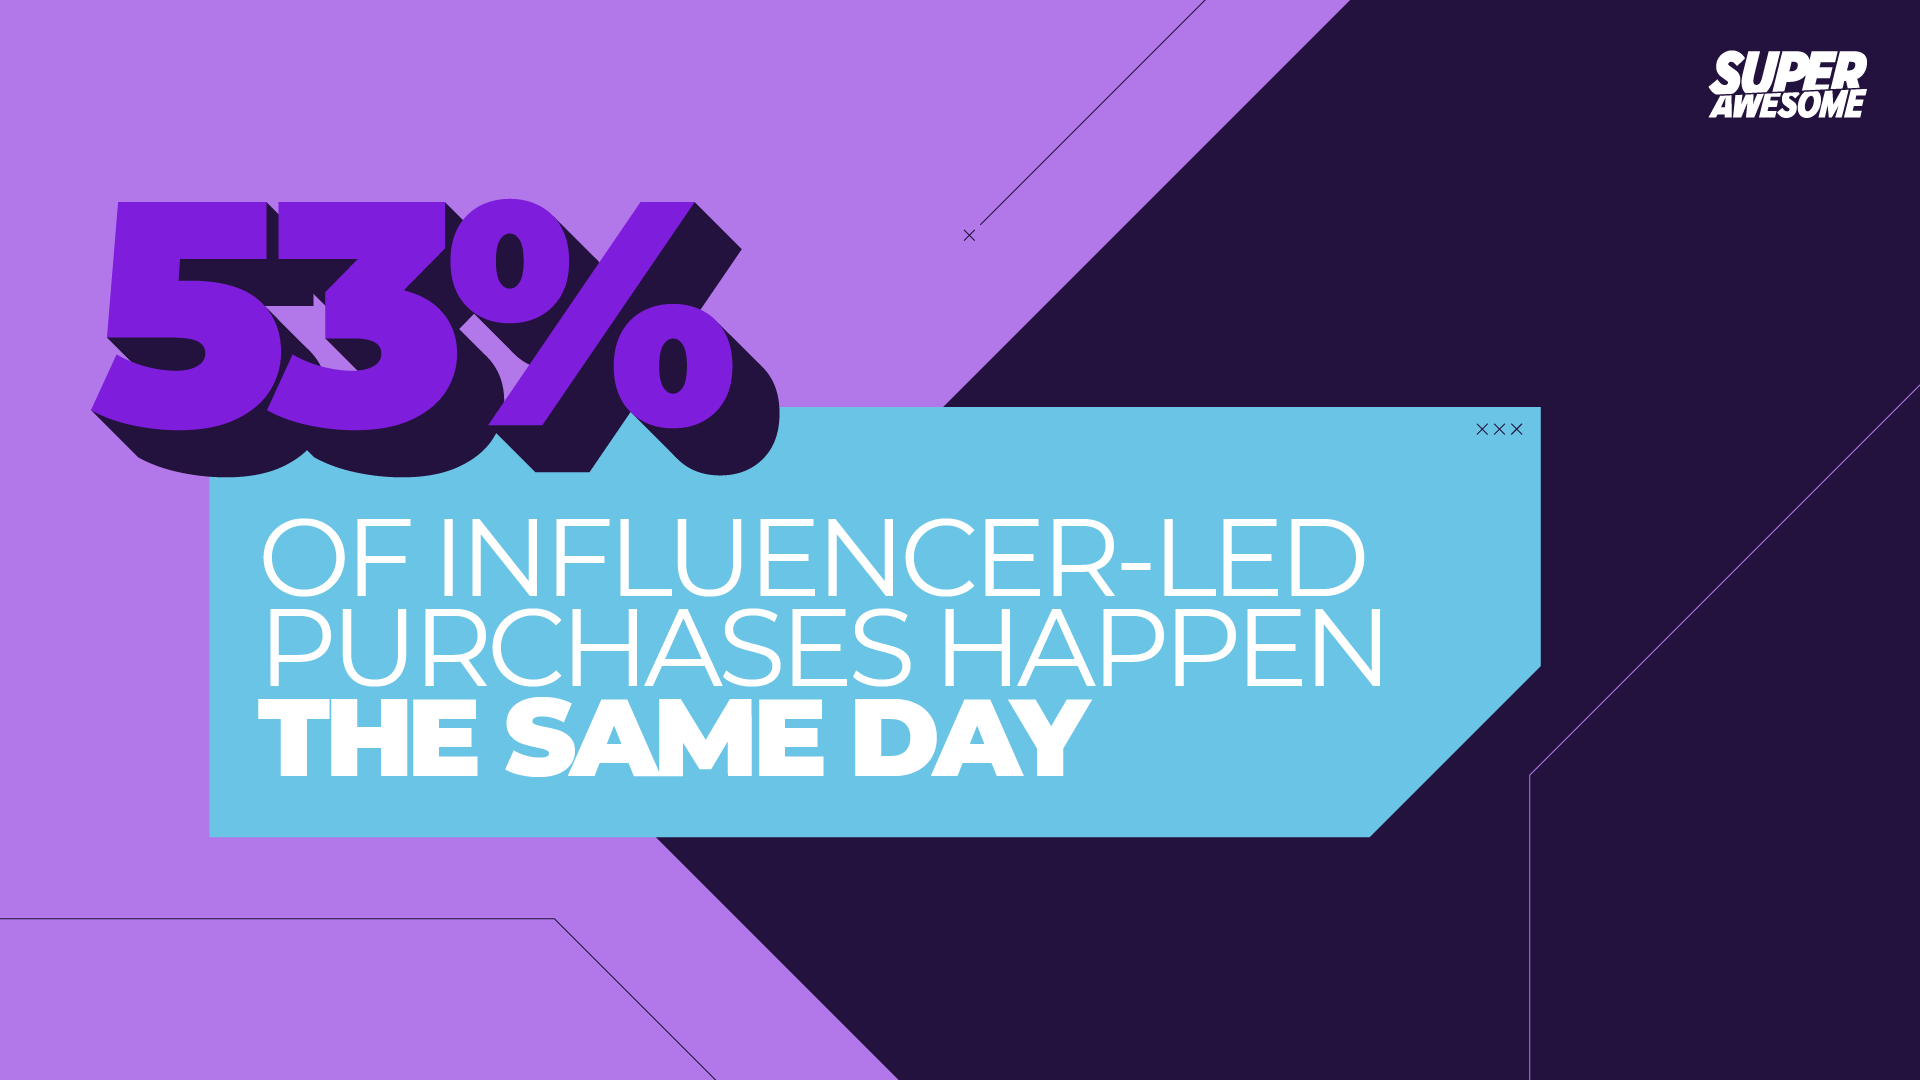 53% of influencer-led purchases happen the same day